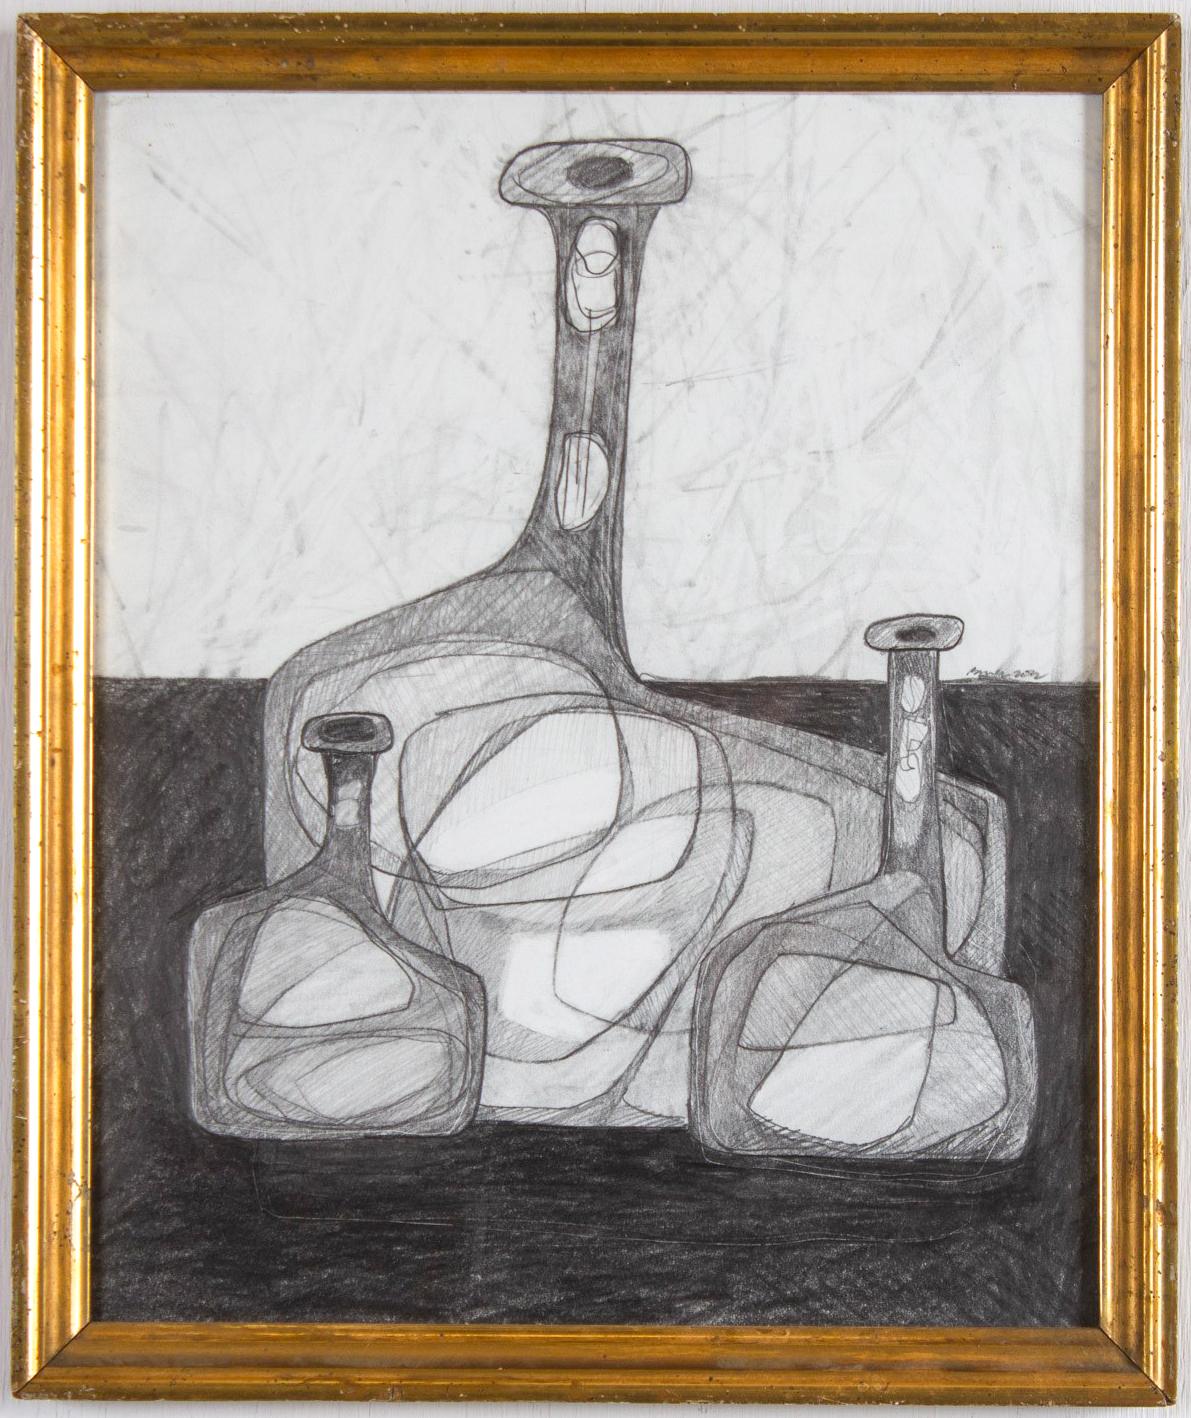 David Dew Bruner Abstract Drawing - Three Bottles: Abstract Cubist Style Morandi Bottle Still Life Pencil Drawing